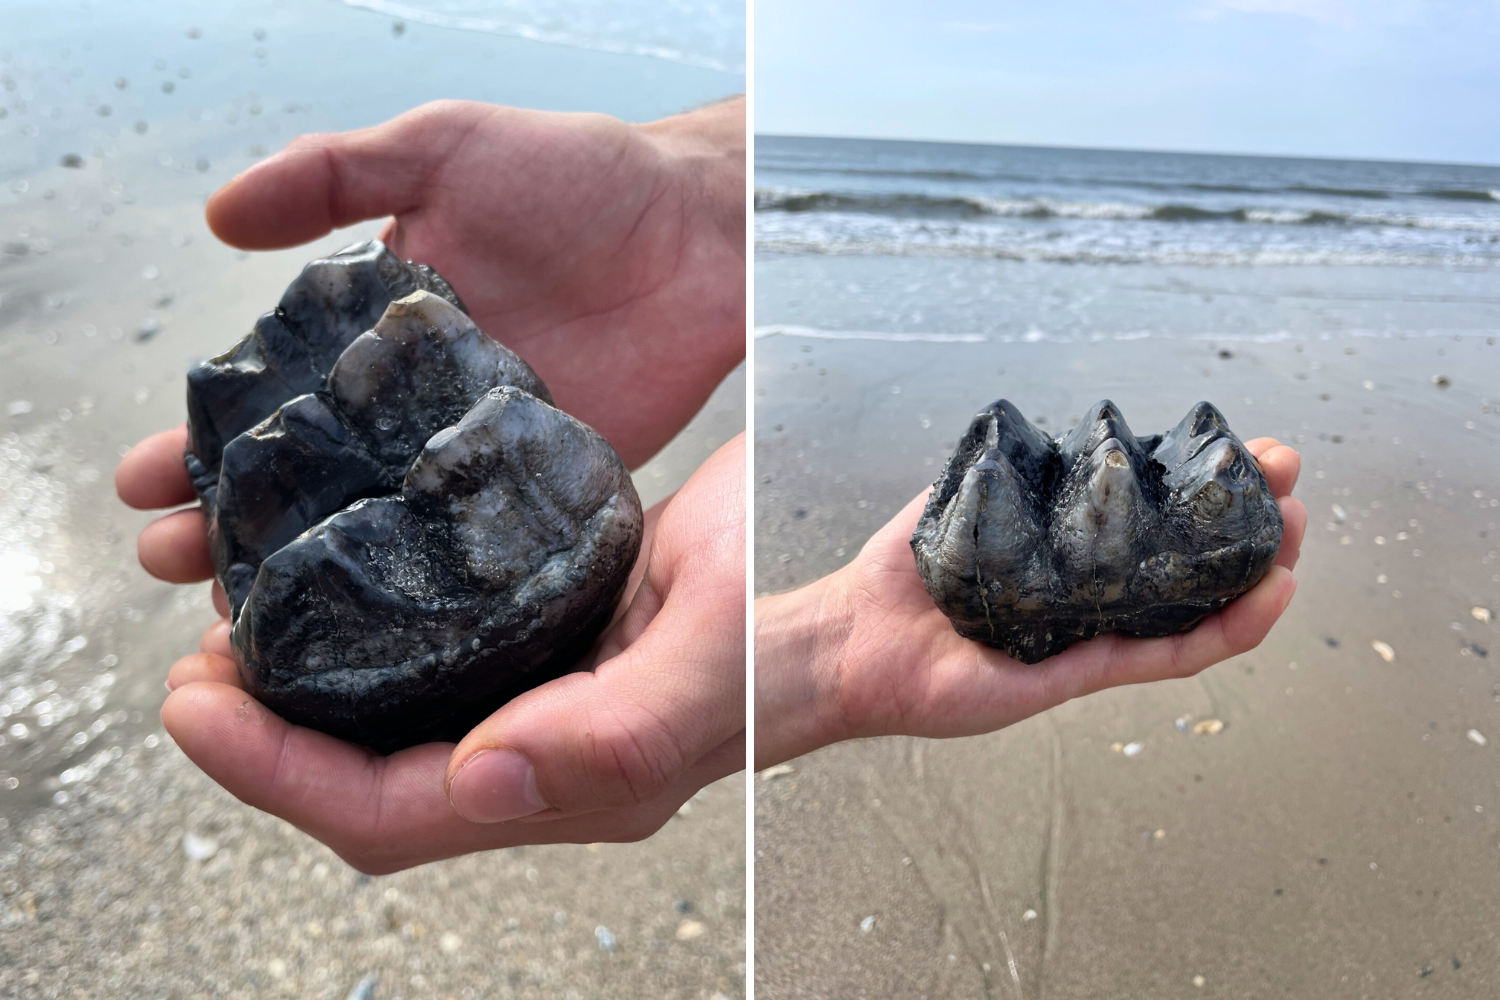 "Once in a lifetime" mastodon fossil tooth found on South Carolina beach